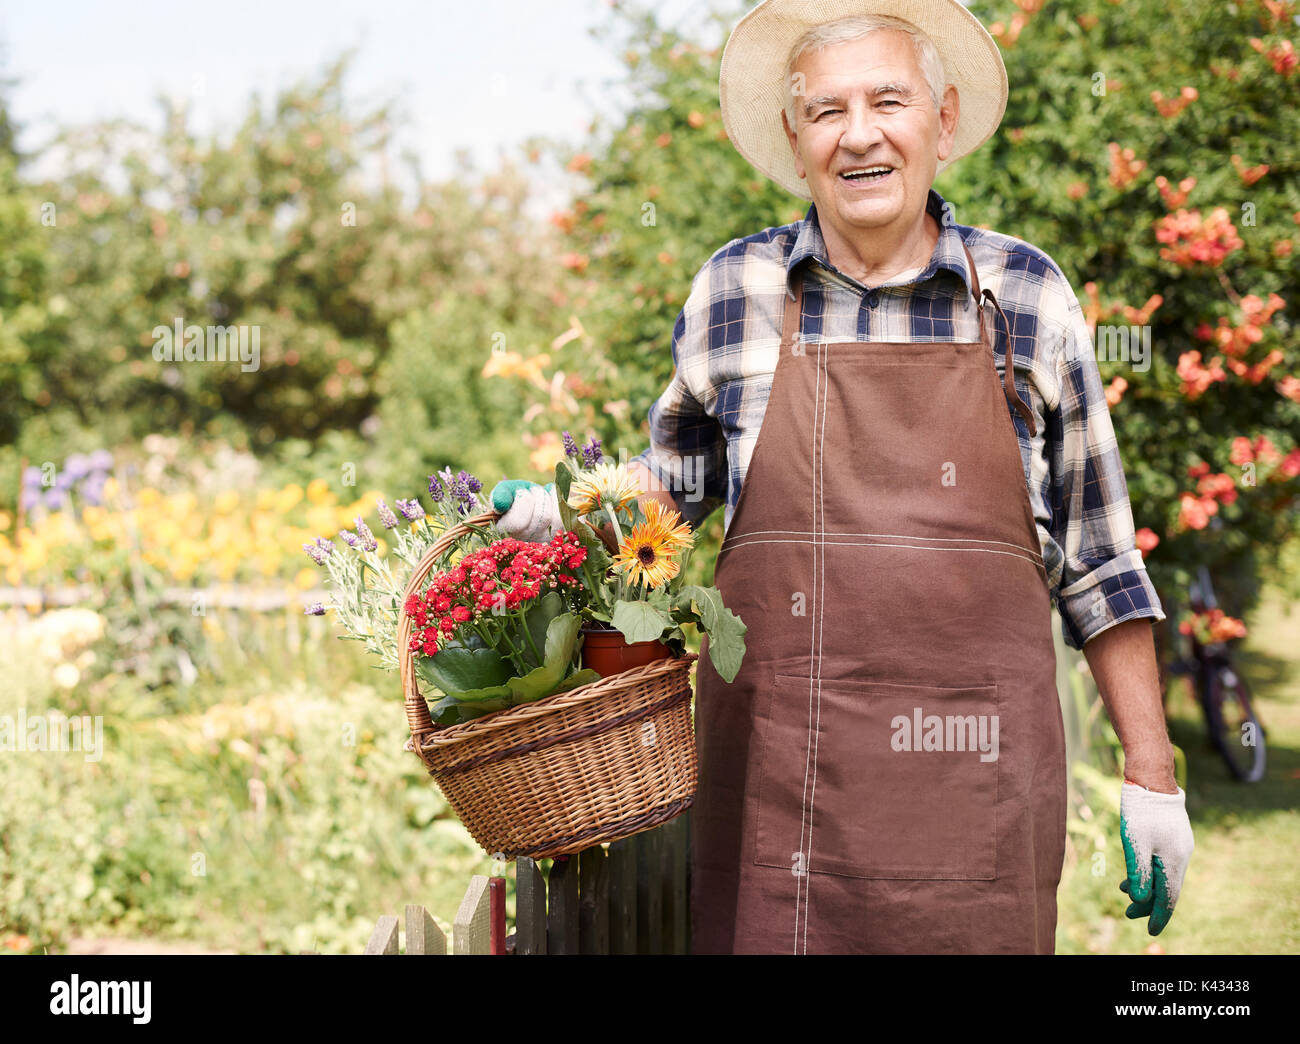 He loves caring about flowers in the garden Stock Photo